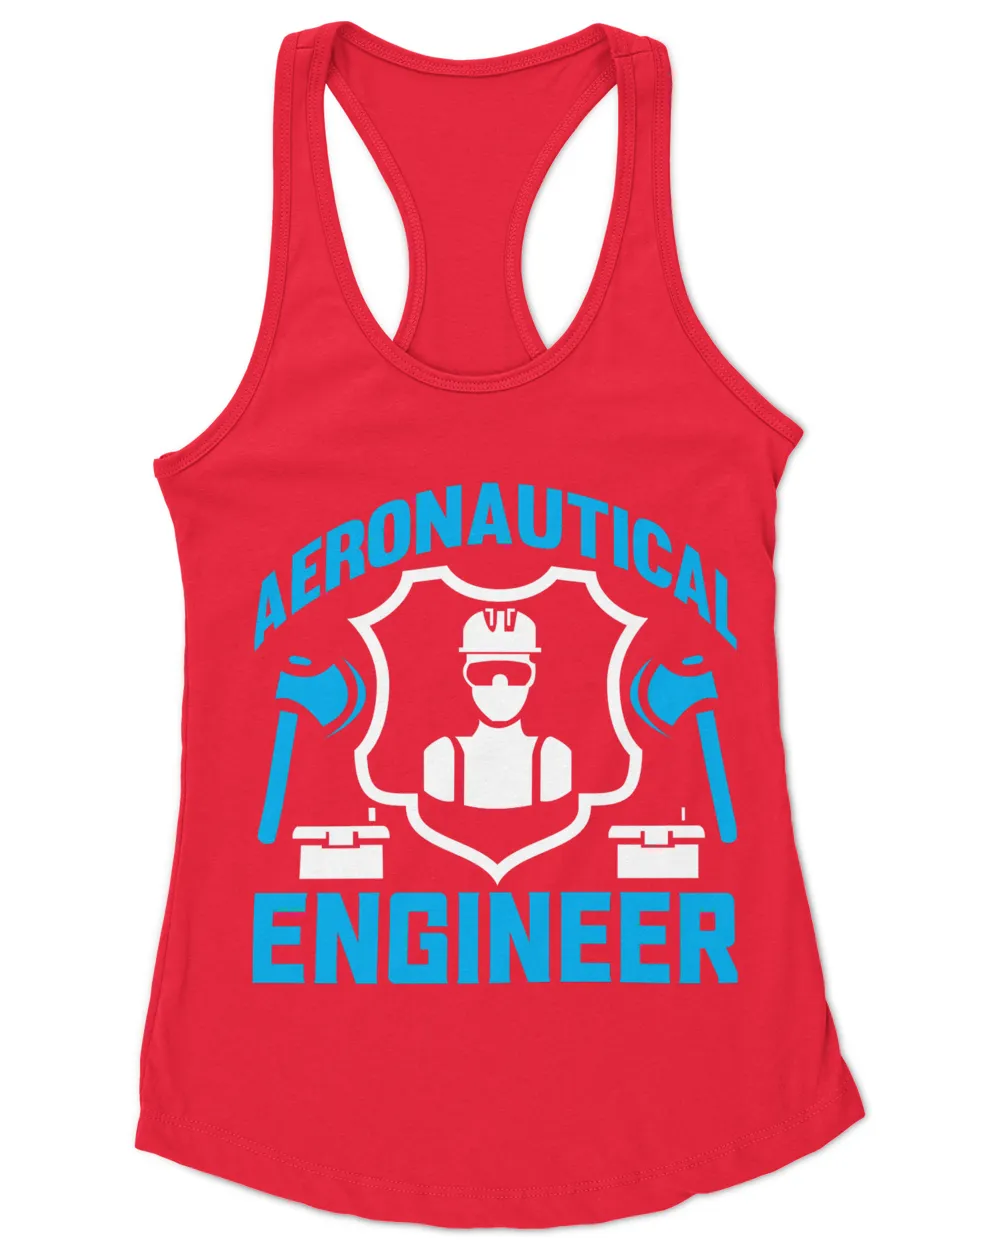 Engineer Definition Funny Engineering Gift T-Shirt (3)